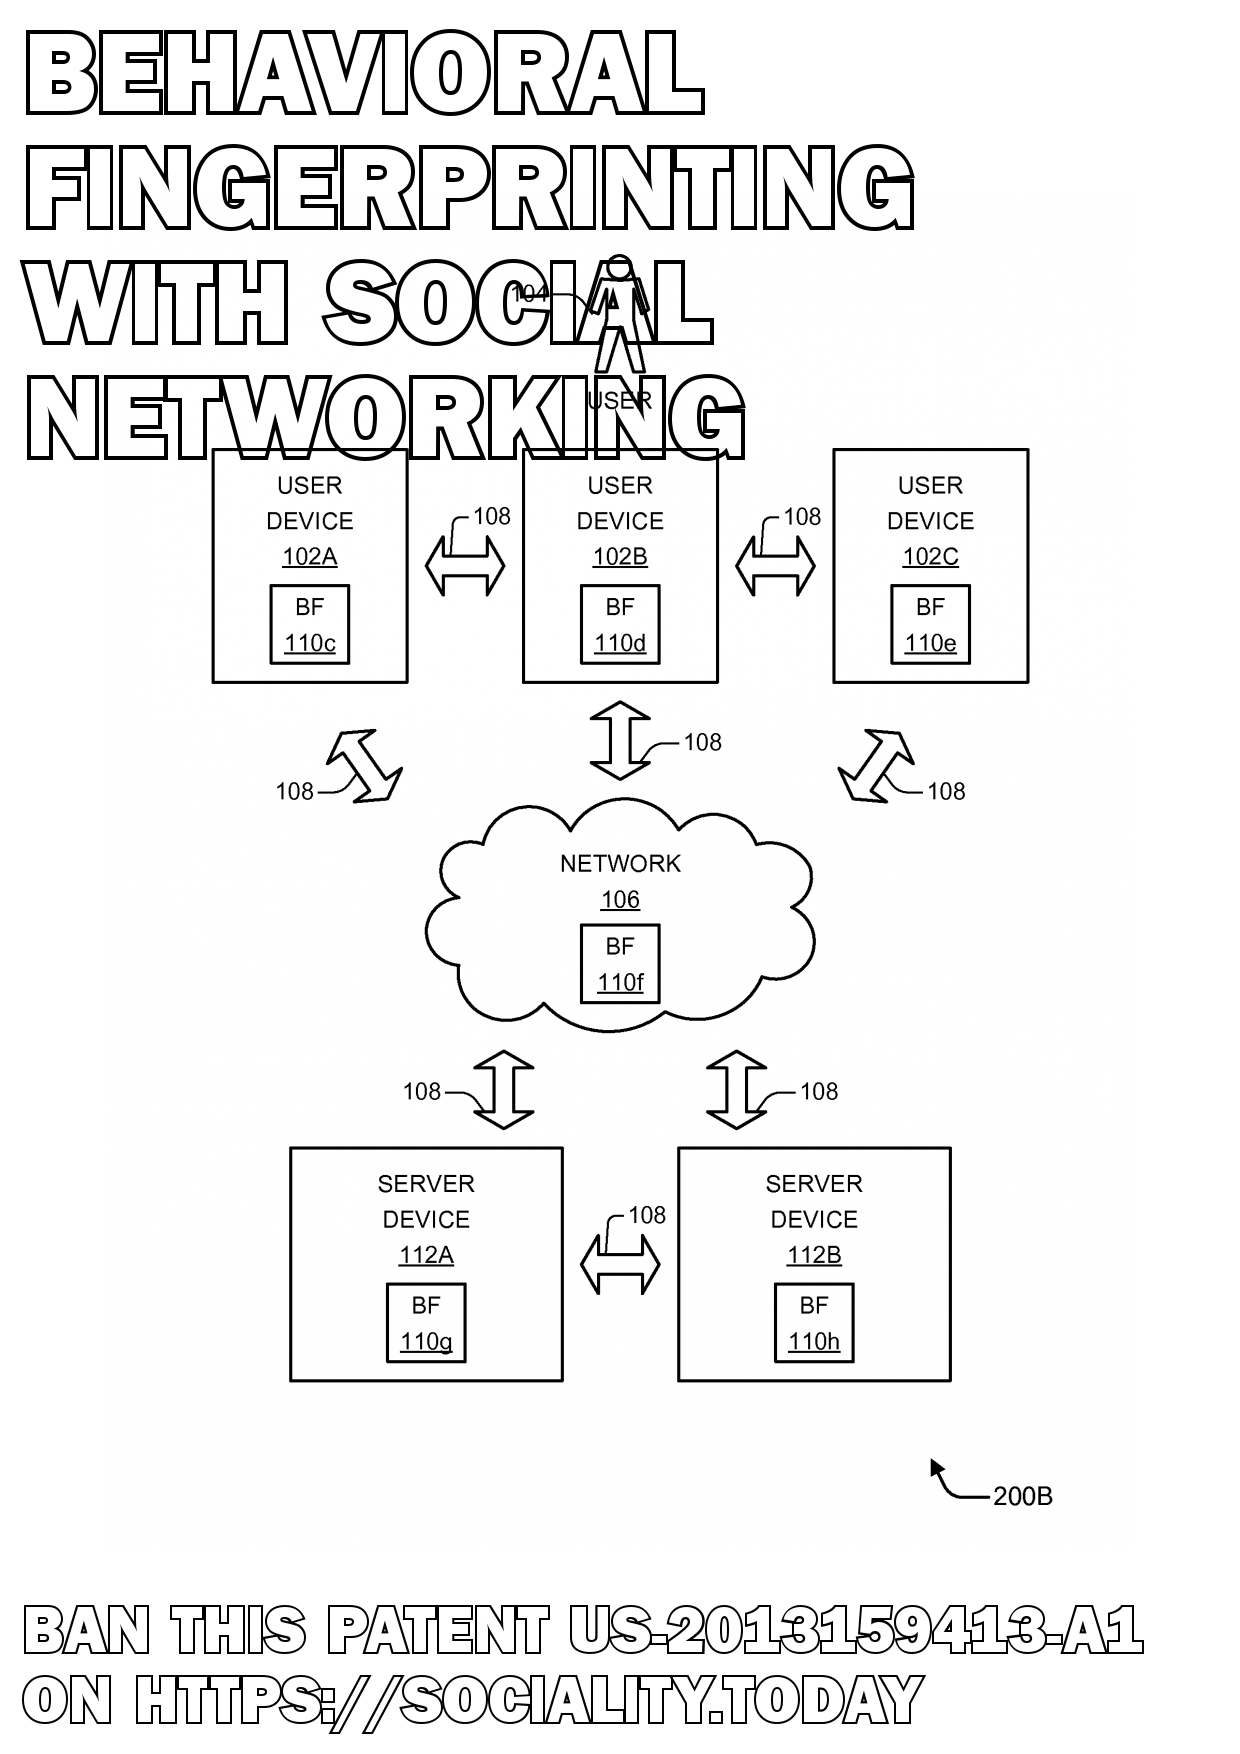 Behavioral fingerprinting with social networking  - US-2013159413-A1